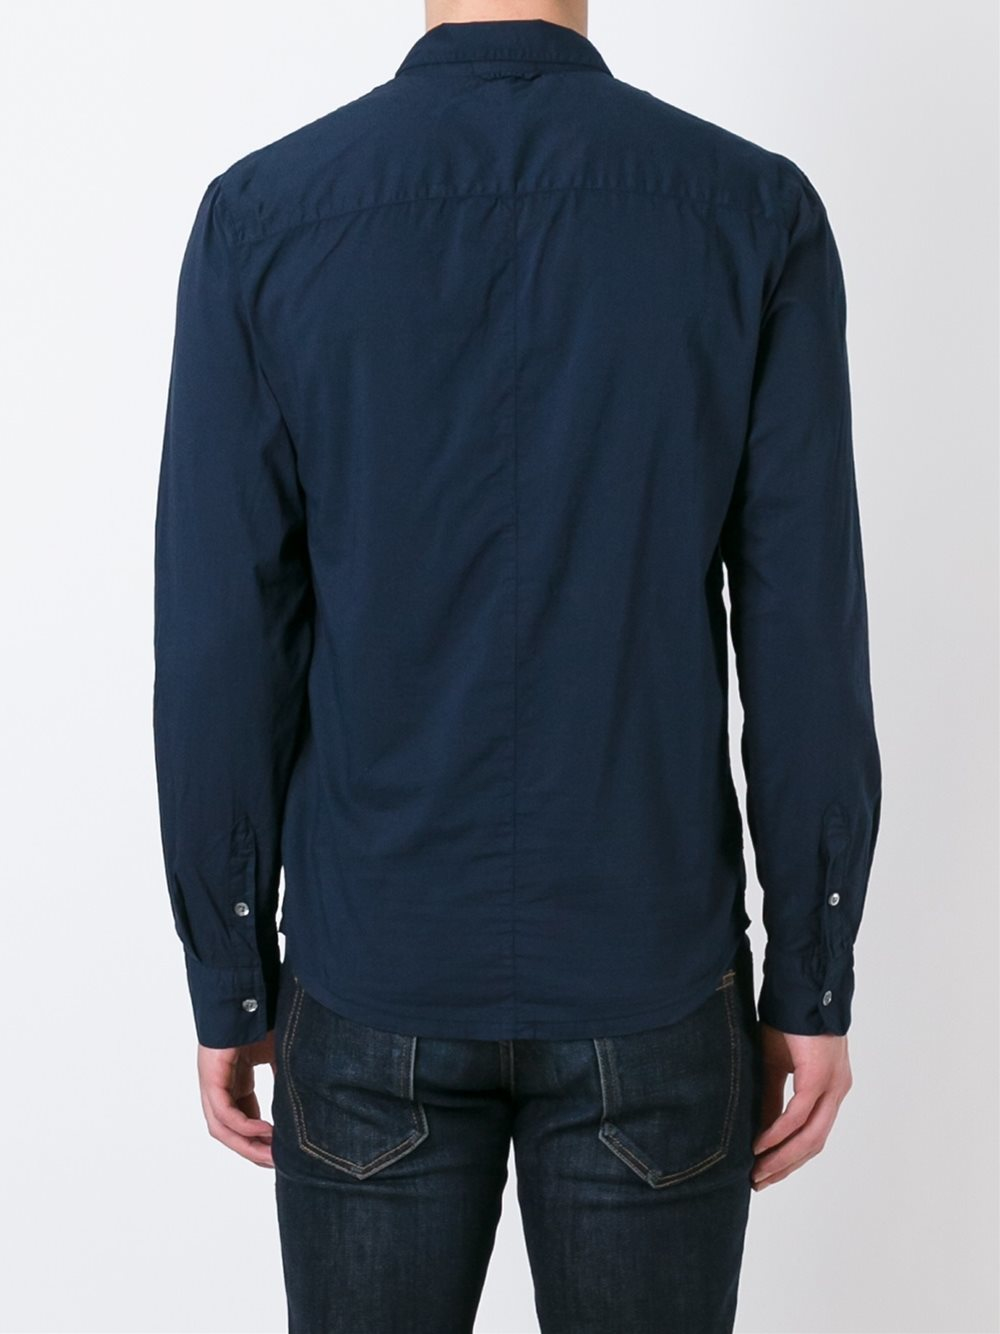 James perse Classic Shirt in Blue for Men | Lyst